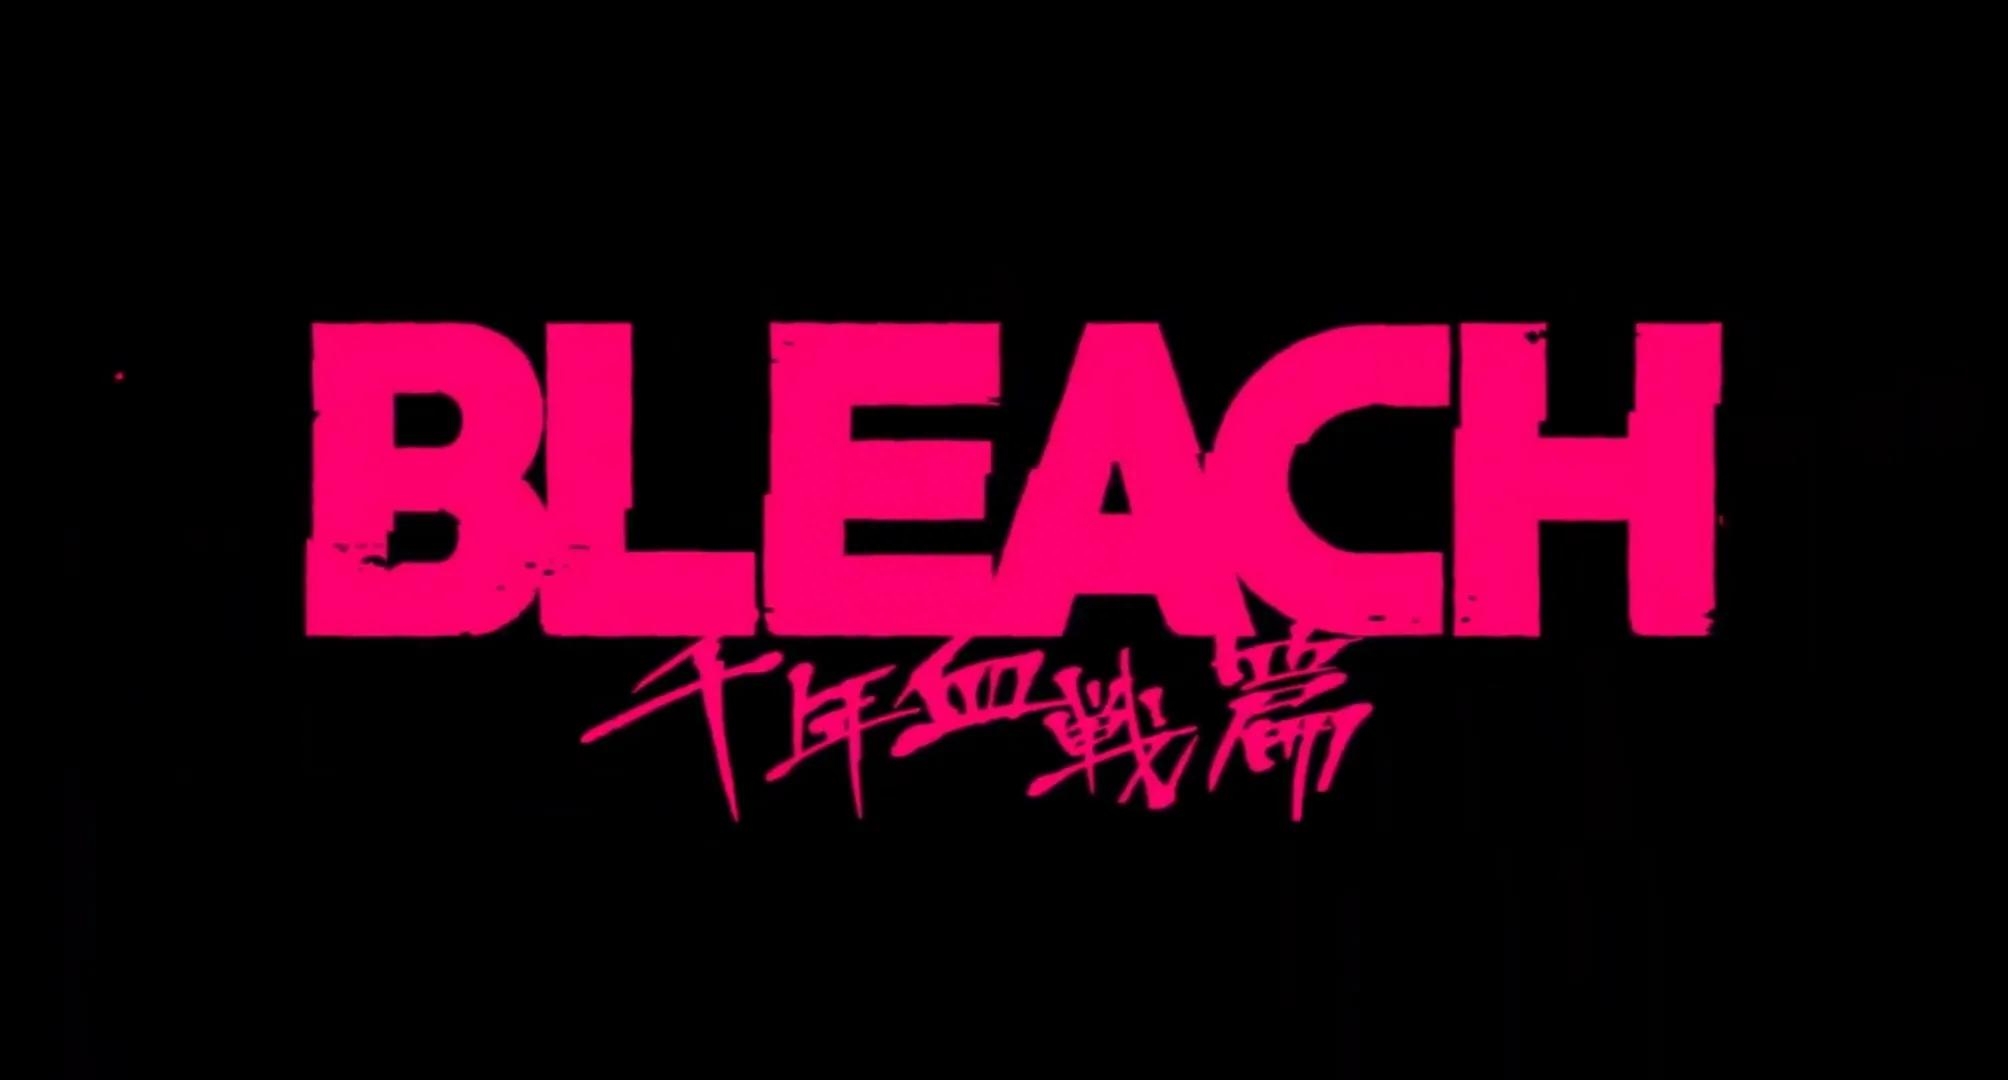 BLEACH: The Soul Reapers Are Back with a Splash!-ACGArea